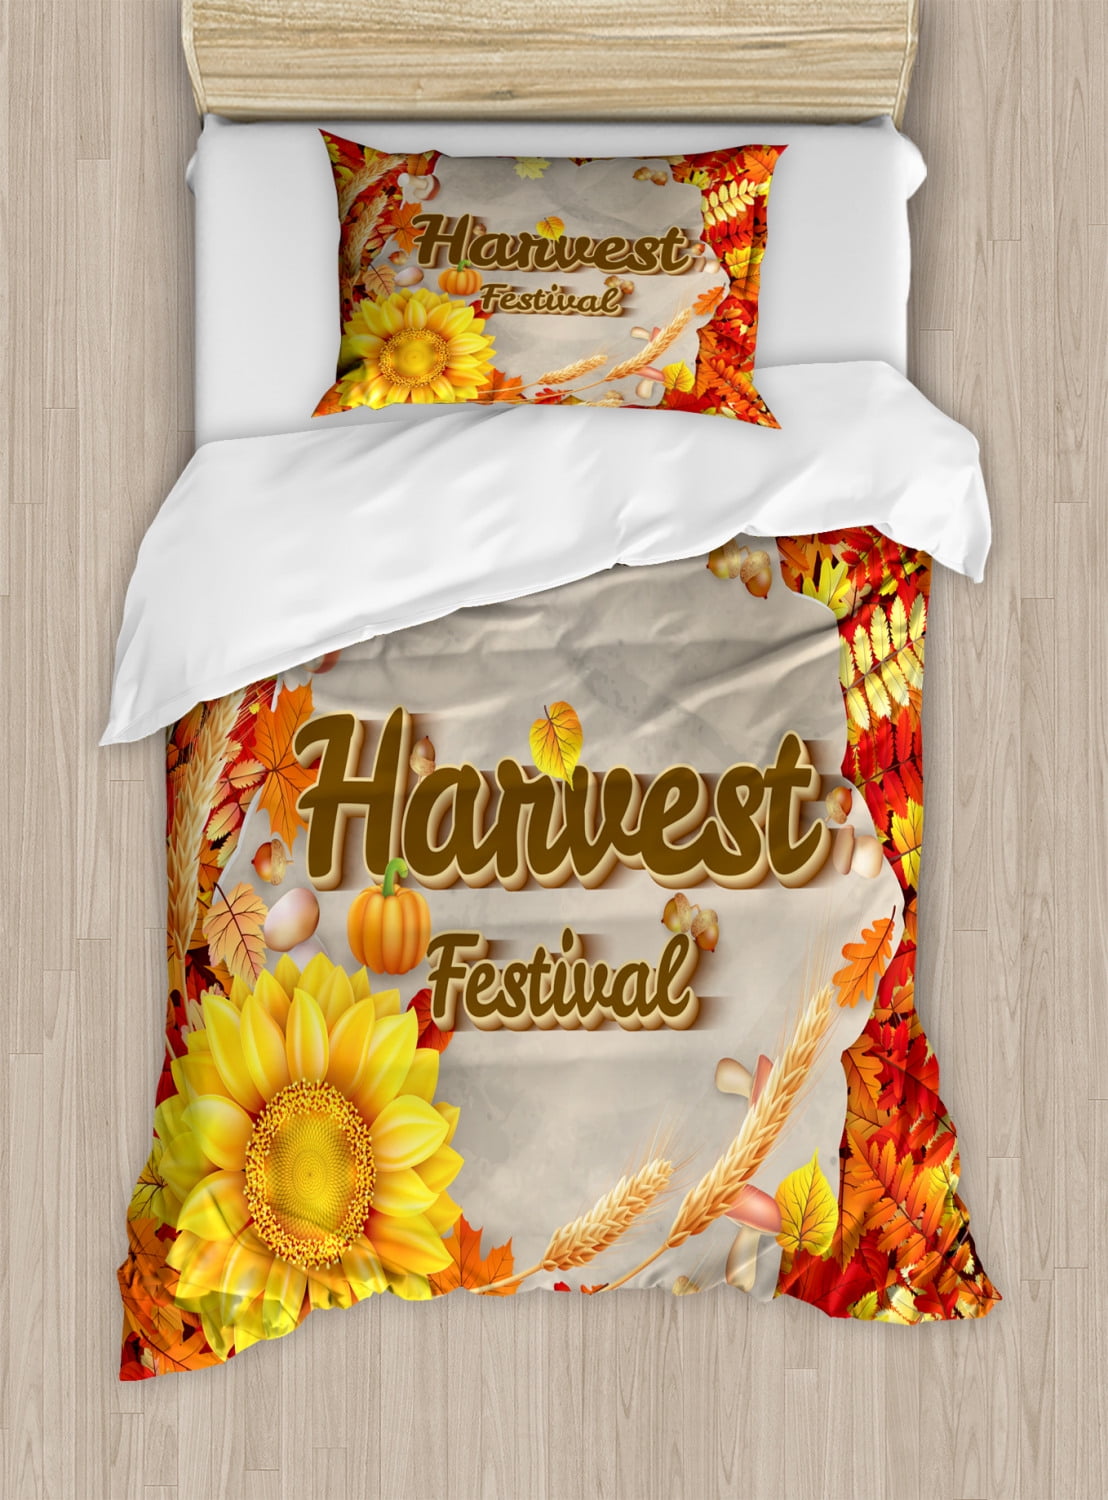 A Decorative 3 Piece Bedding Set with Pillow Shams Fall Forest with Shady Deciduous Trees and Faded Leaf Magic Woodland Theme Picture Queen/Full Ambesonne Autumn Duvet Cover Set Apricot Brown Red nev_27438_queen 